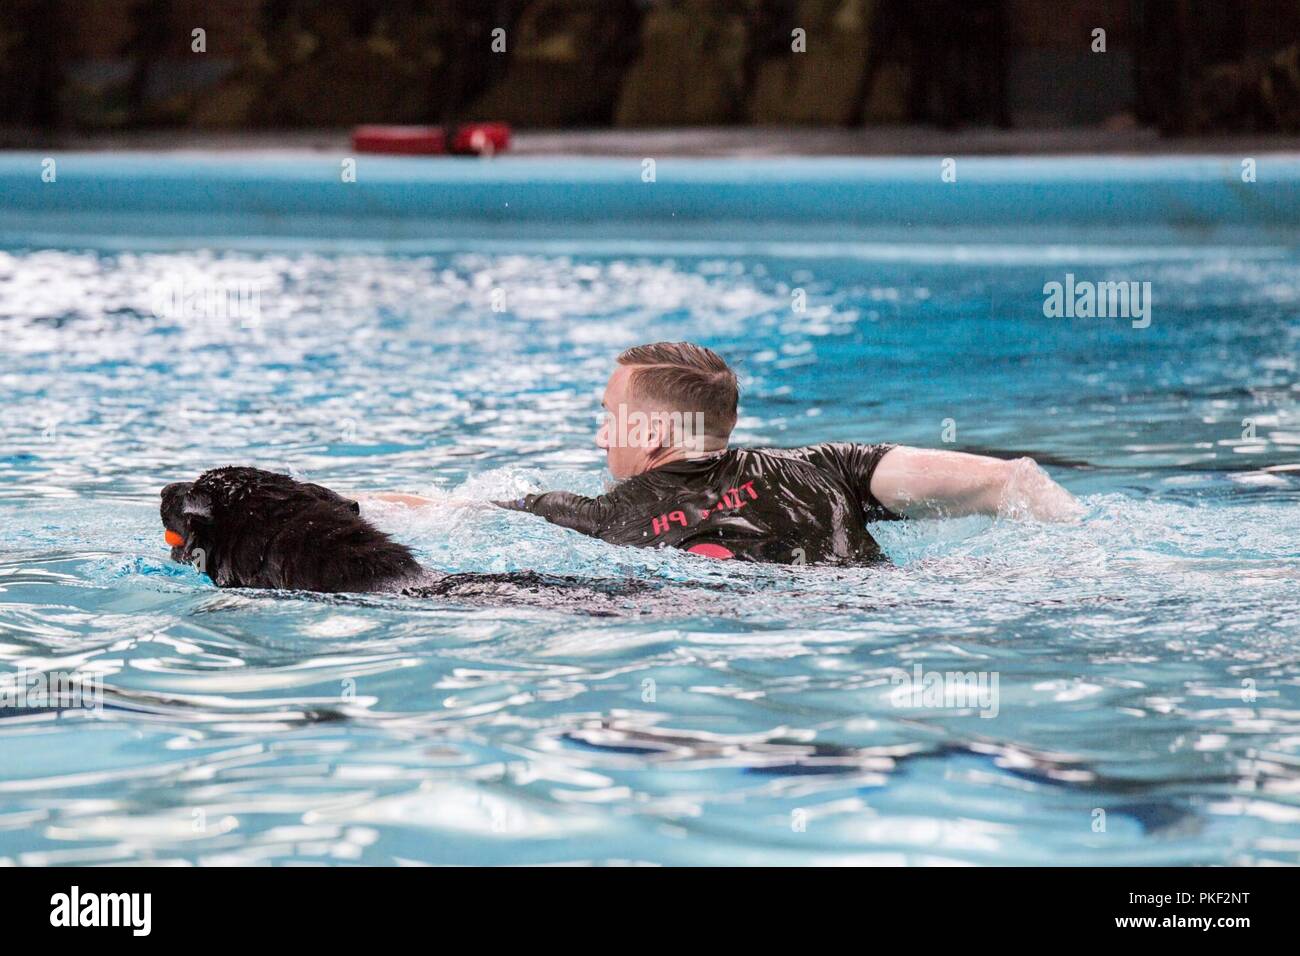 Corporal Bruce Russell, a 2nd Law Enforcement Battalion military working dog-handler, swims beside his dog, Indy, in the Area 5 pool at Marine Corps Base Camp Lejeune, N.C., Aug. 3, 2018. 2nd LEB practiced aggression training as part of specialized training to familiarize their dogs with water. The 2nd LEB military working dogs benefit from this particular type of training due to not being exposed to water tactics during initial training periods and become better accustomed to performing duties in atypical situations. Stock Photo